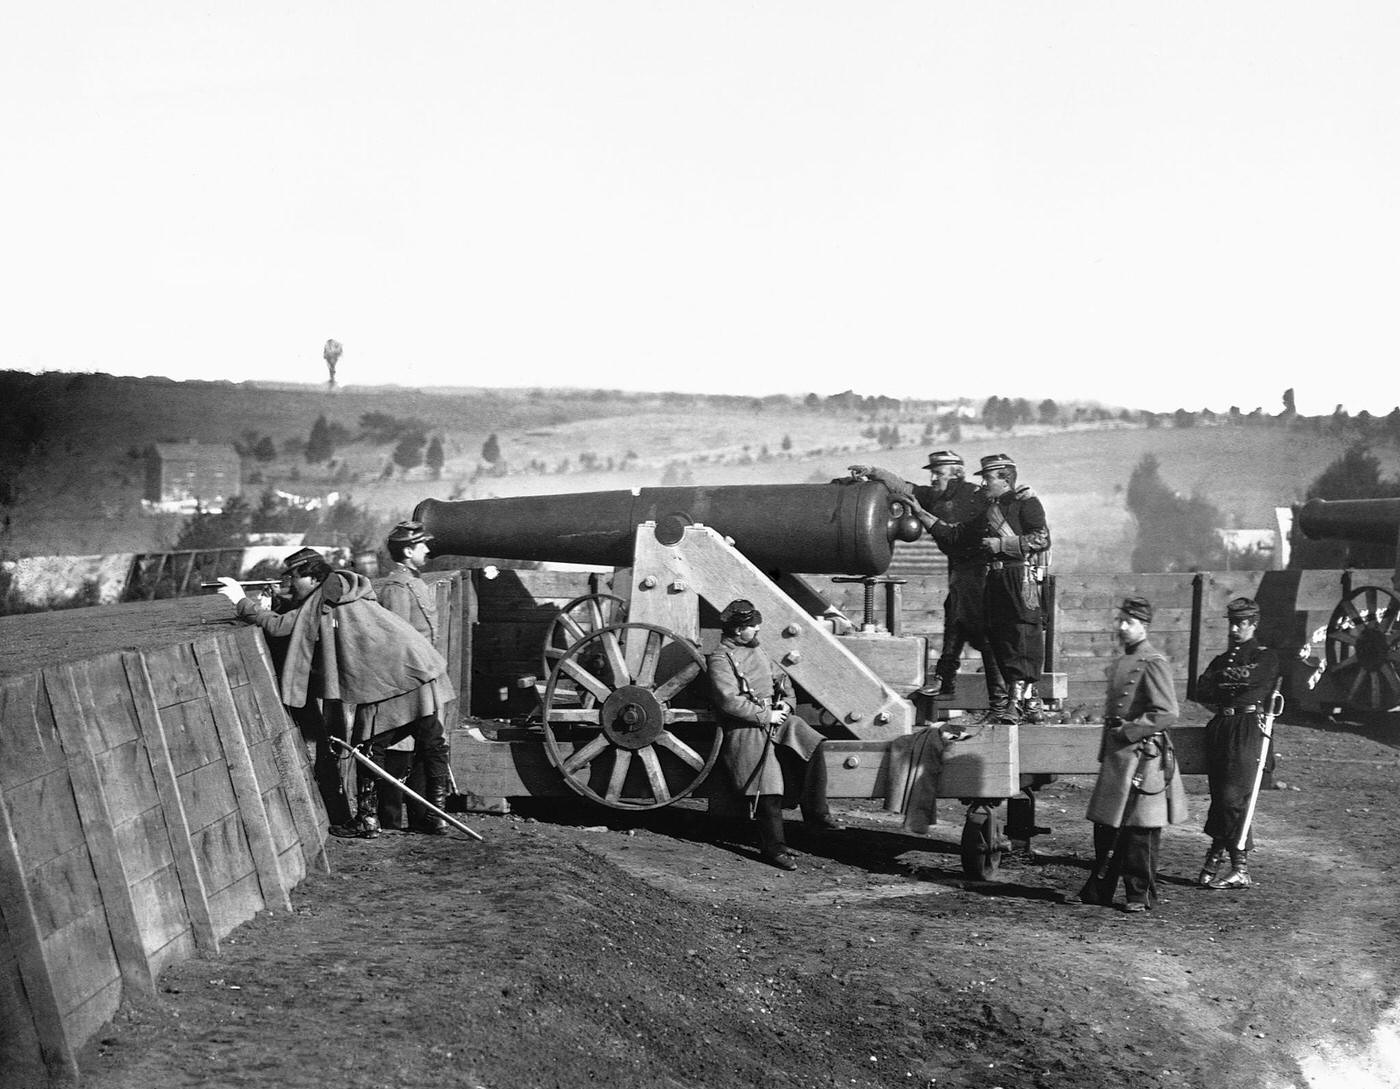 Officers of the Fifty-fifth Infantry inspecting cannons at Fort Gaines, near Tenley, D.C., 1861